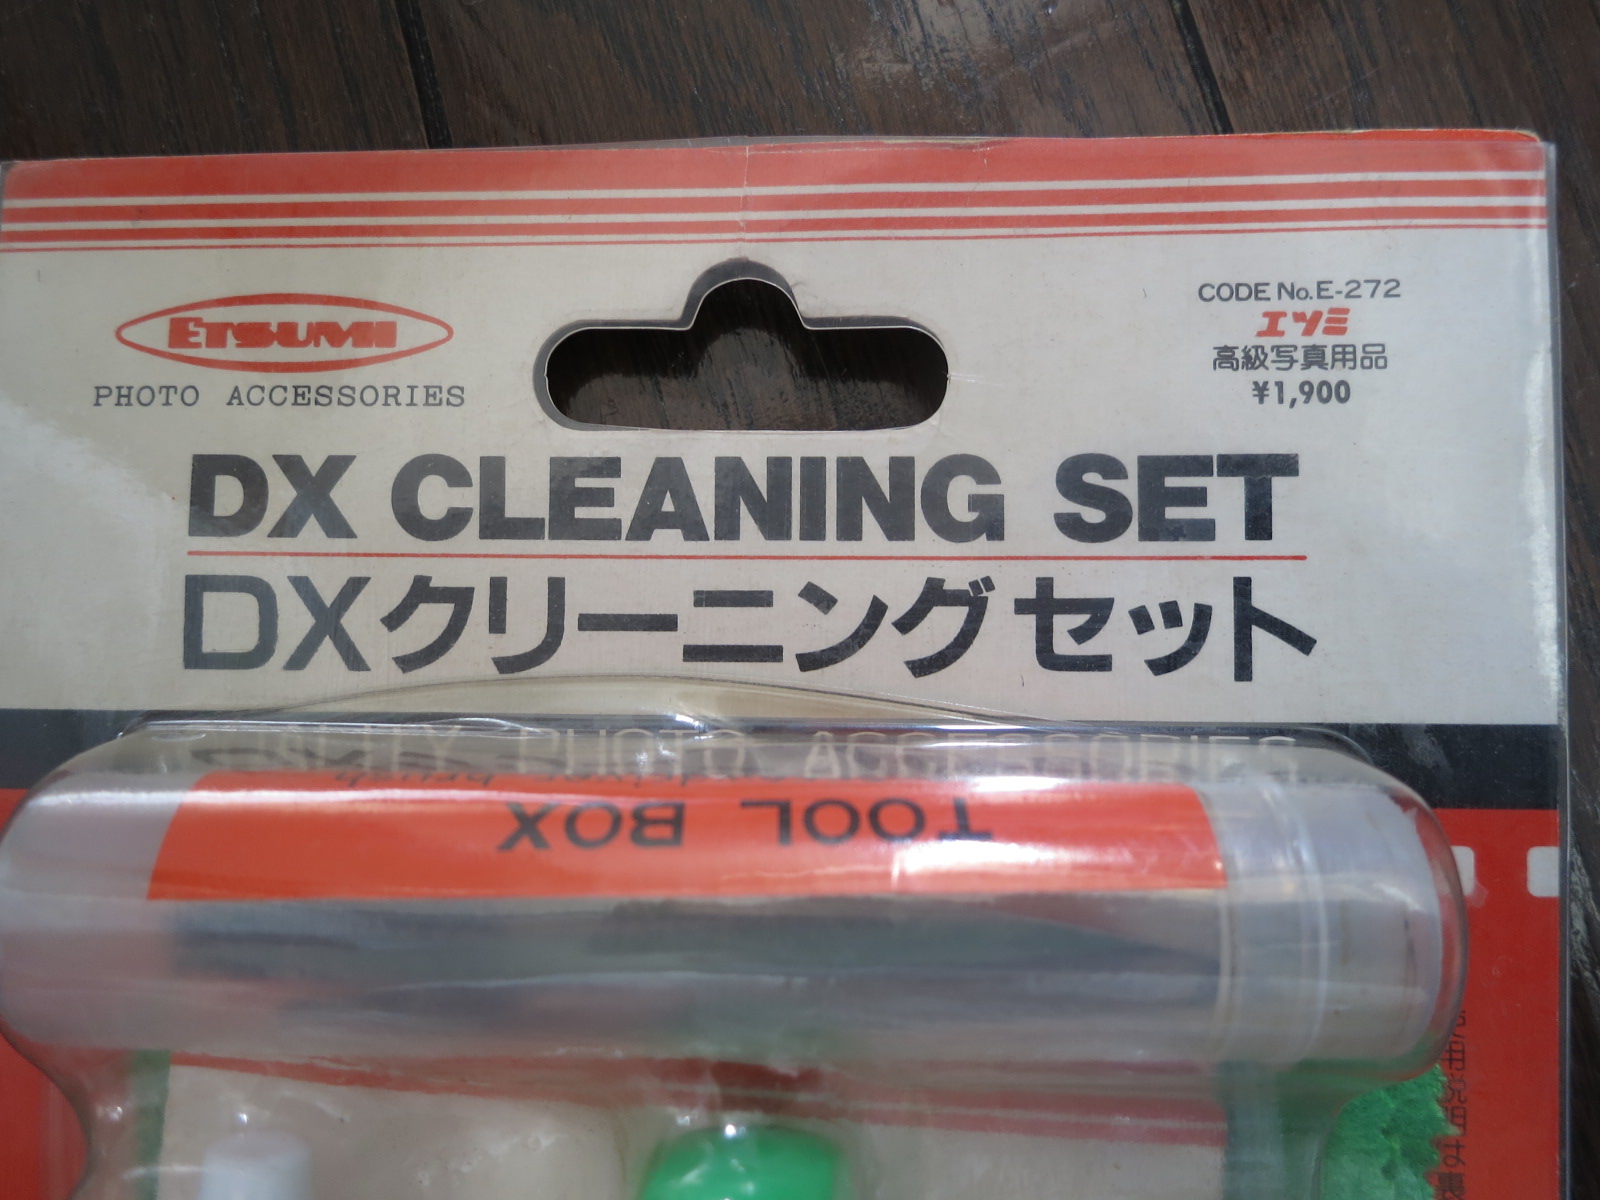 ETSUMIe loading DX CLEANING SET PHOTO ACCESSORIES E-272 camera cleaning new goods ..!?